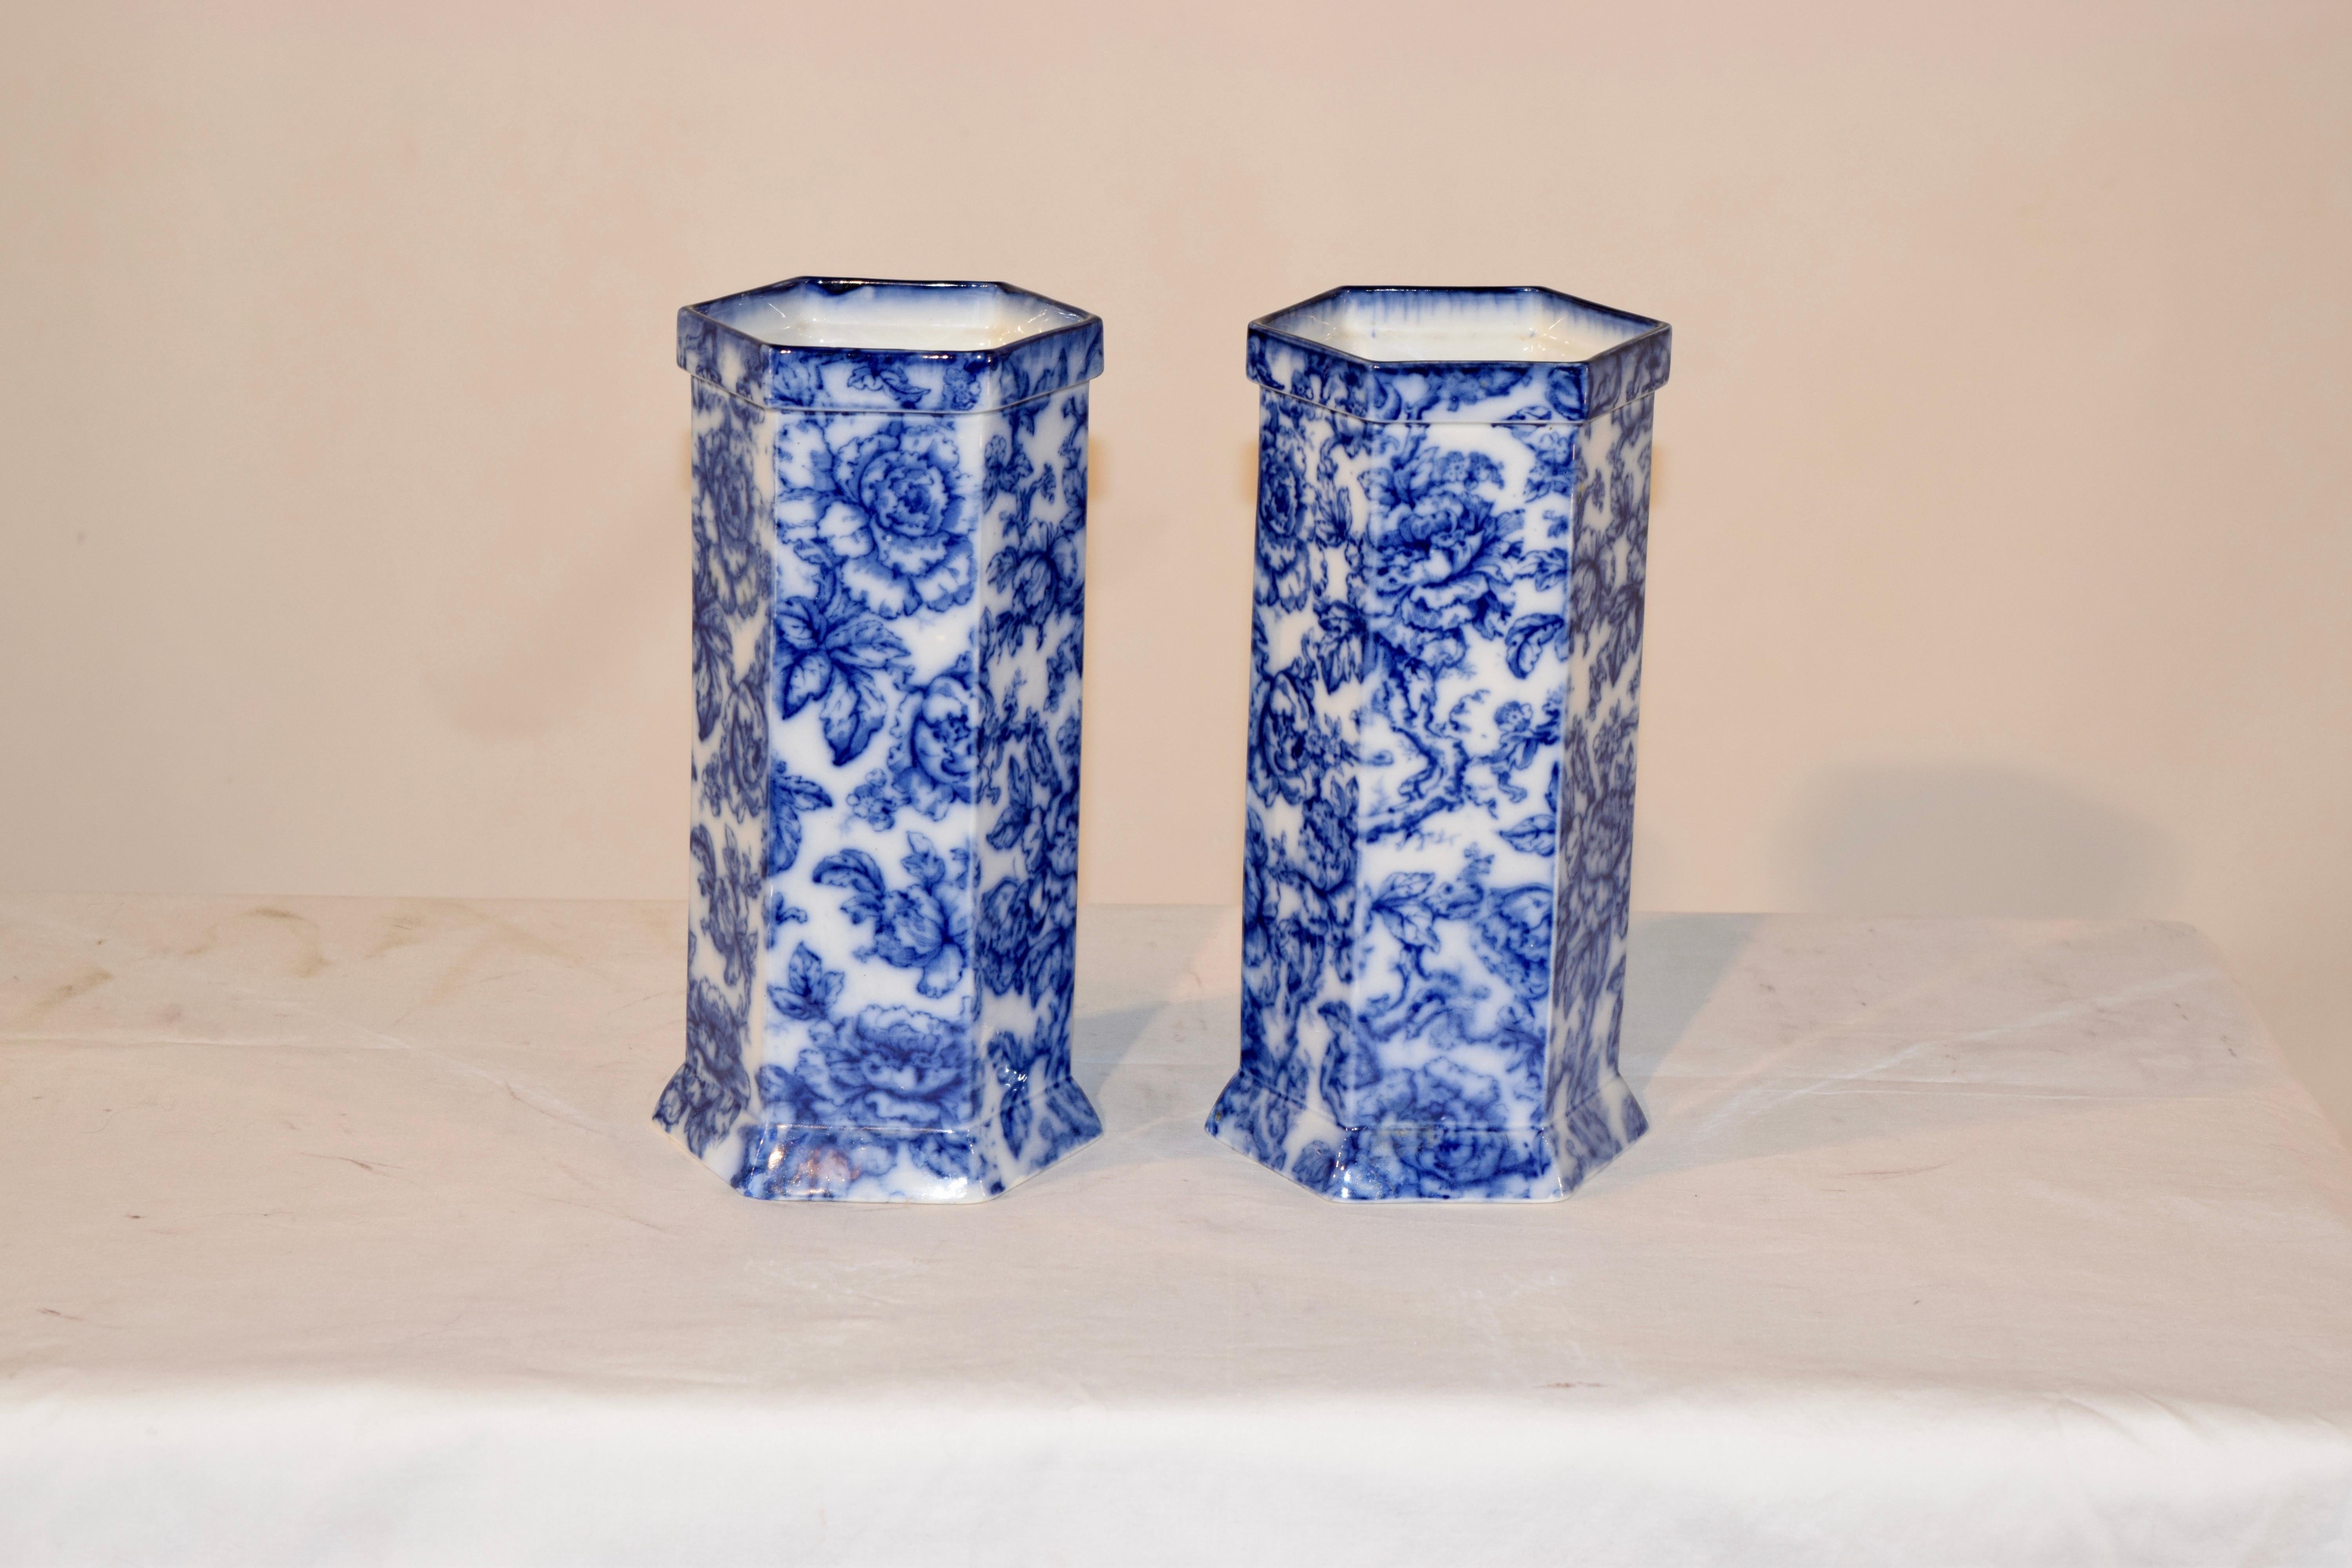 19th century pair of English porcelain vases in the Cavendish pattern by Keeling & Co. Wonderfully shaped 6 sided cylinders with collars at the top and flared rims at the bottom for added flair. The pattern is of florals and branches.